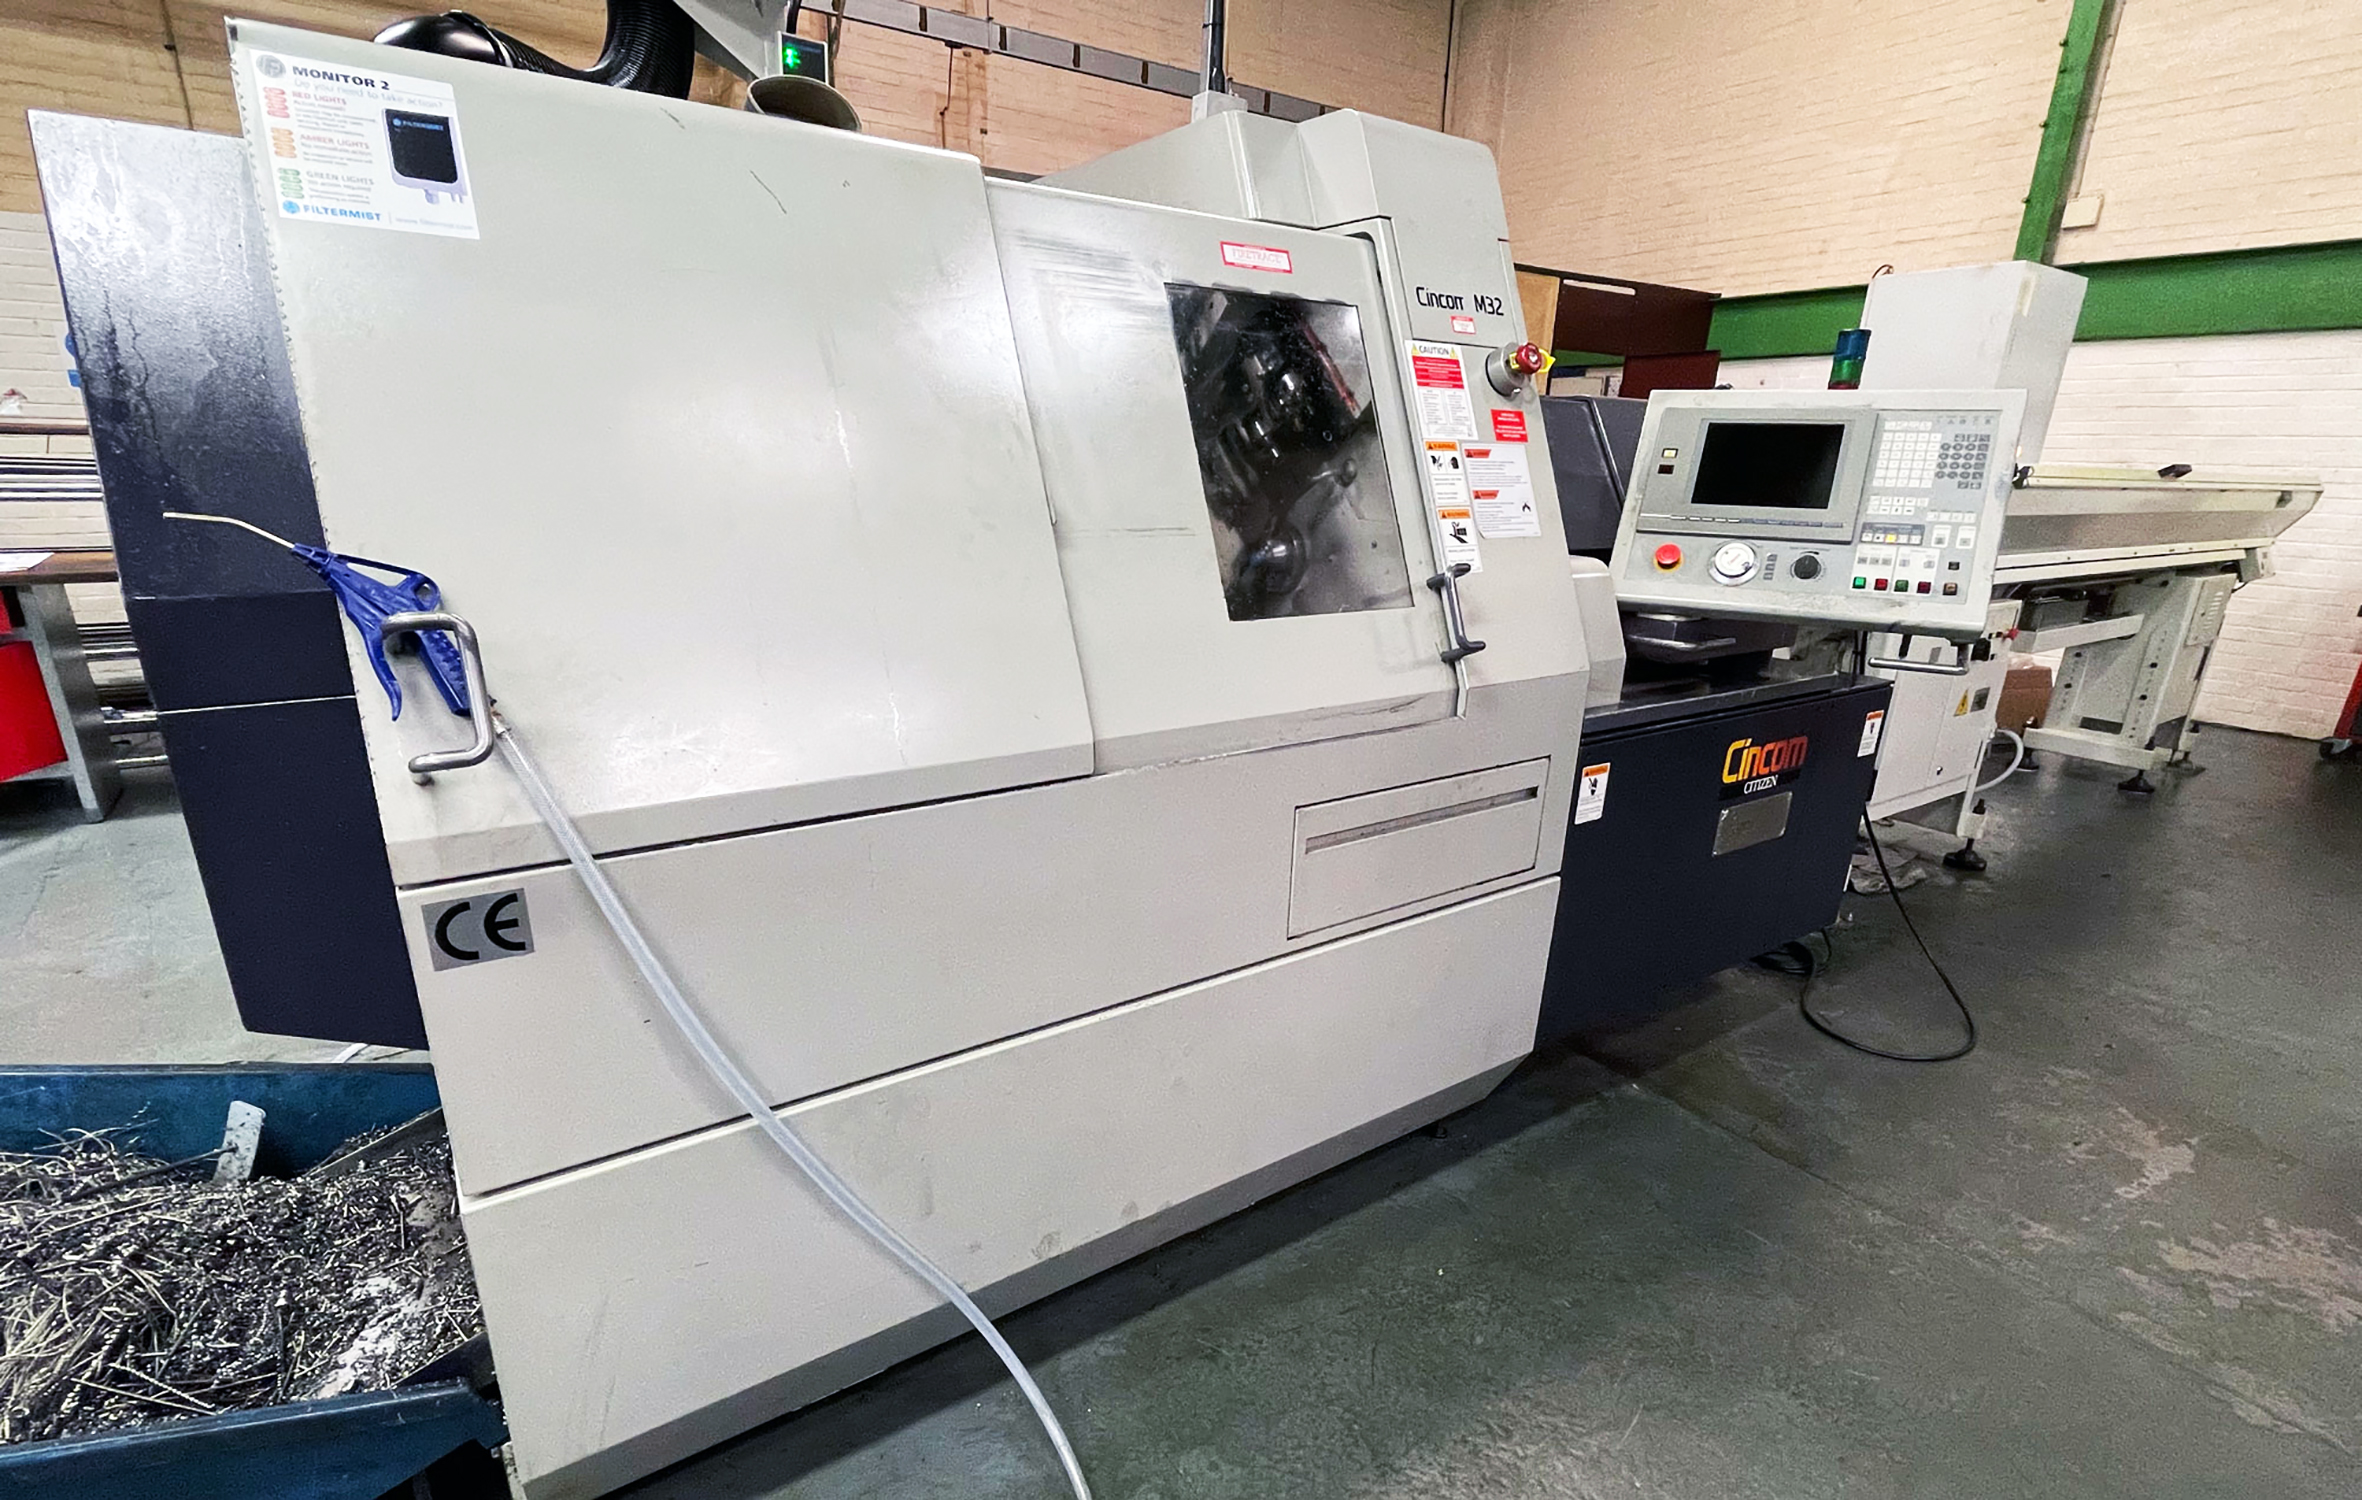 WDS new CNC machines support the expansion of WDS’ stock guarantee across the company’s product range.